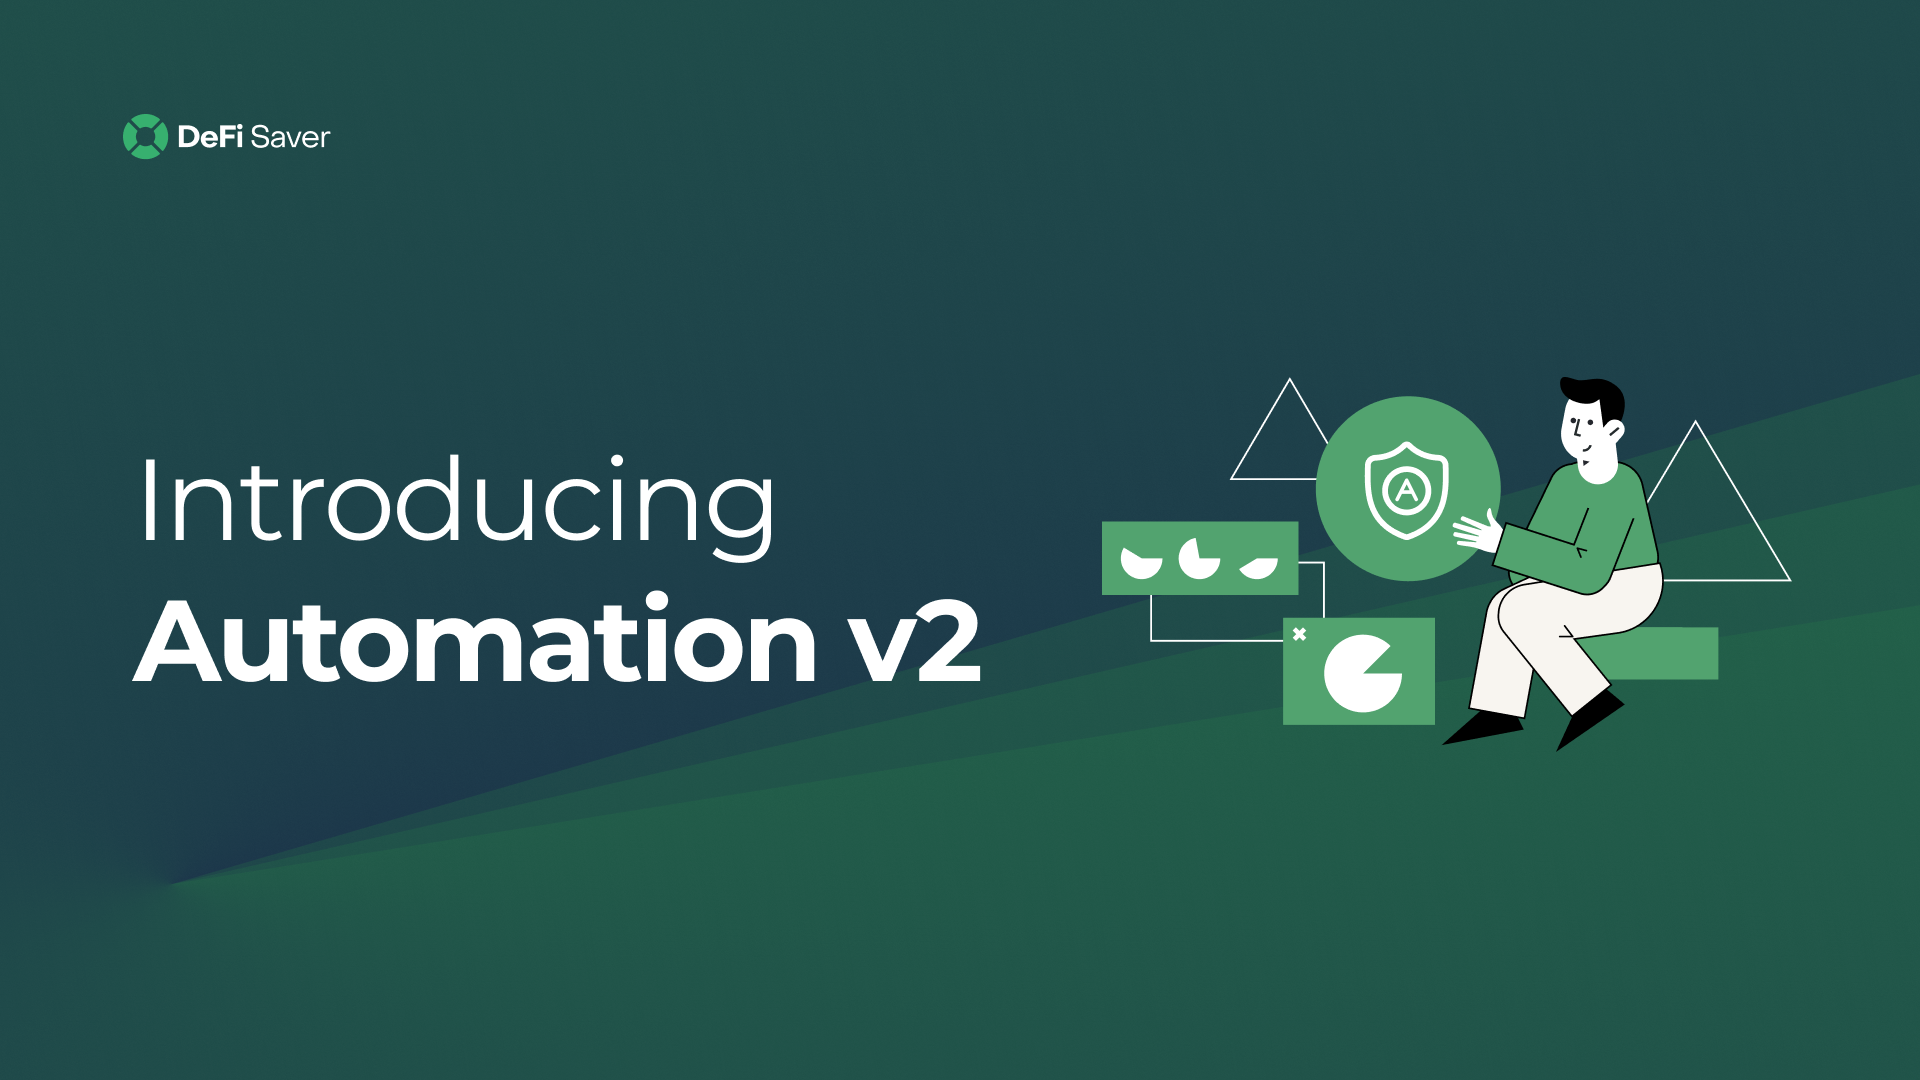 Introducing Automation v2, now with flash loans and next price support